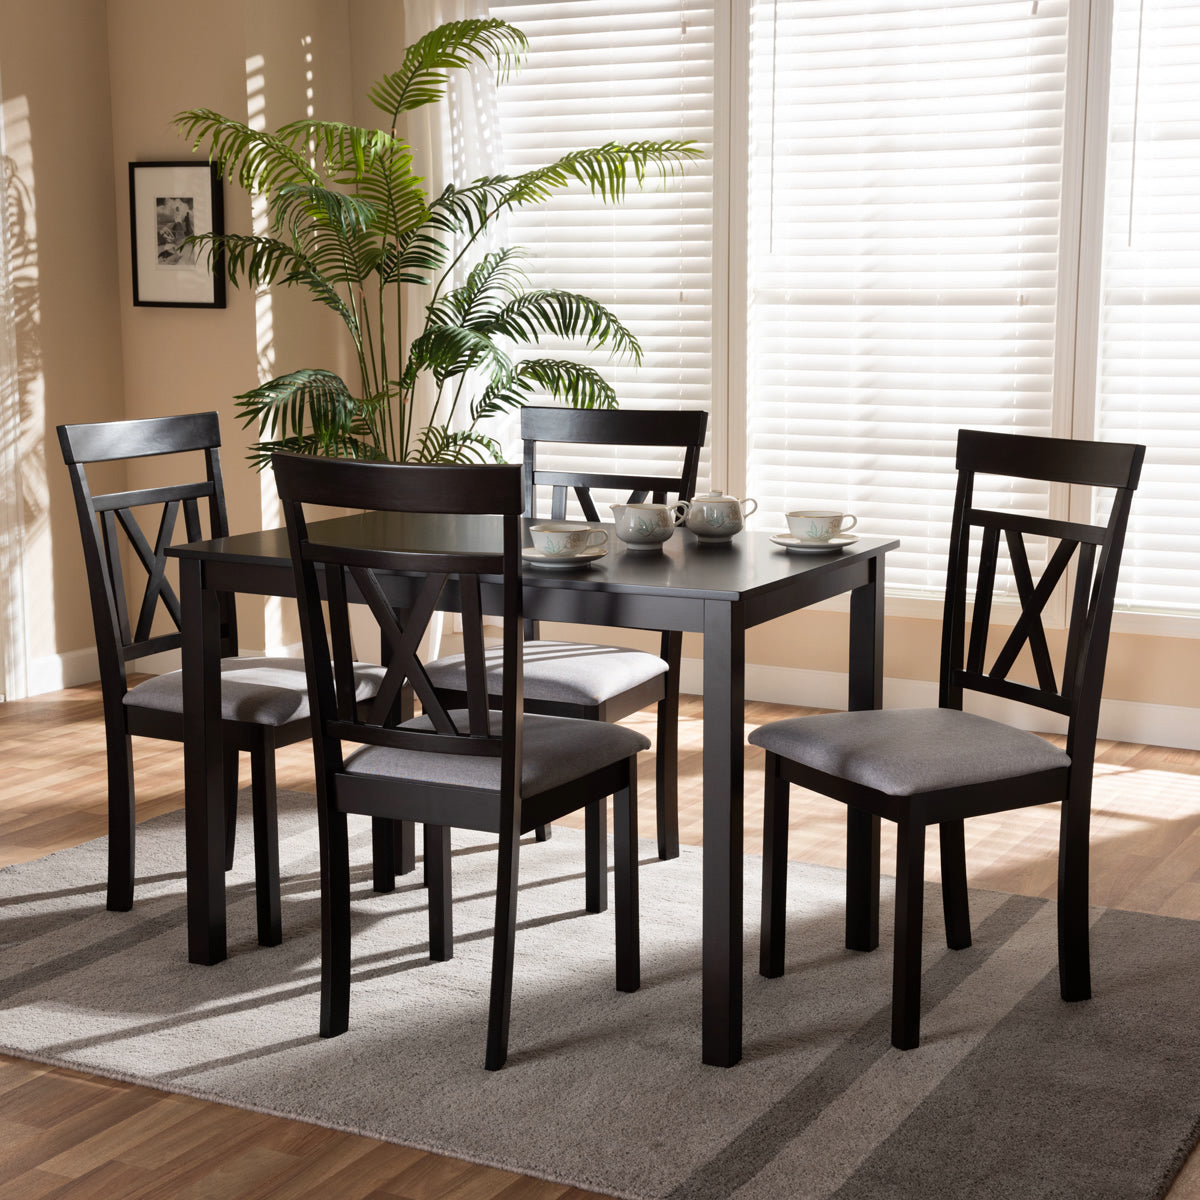 Baxton Studio Rosie Modern and Contemporary Espresso Brown Finished and Grey Fabric Upholstered 5-Piece Dining Set Baxton Studio-0-Minimal And Modern - 2